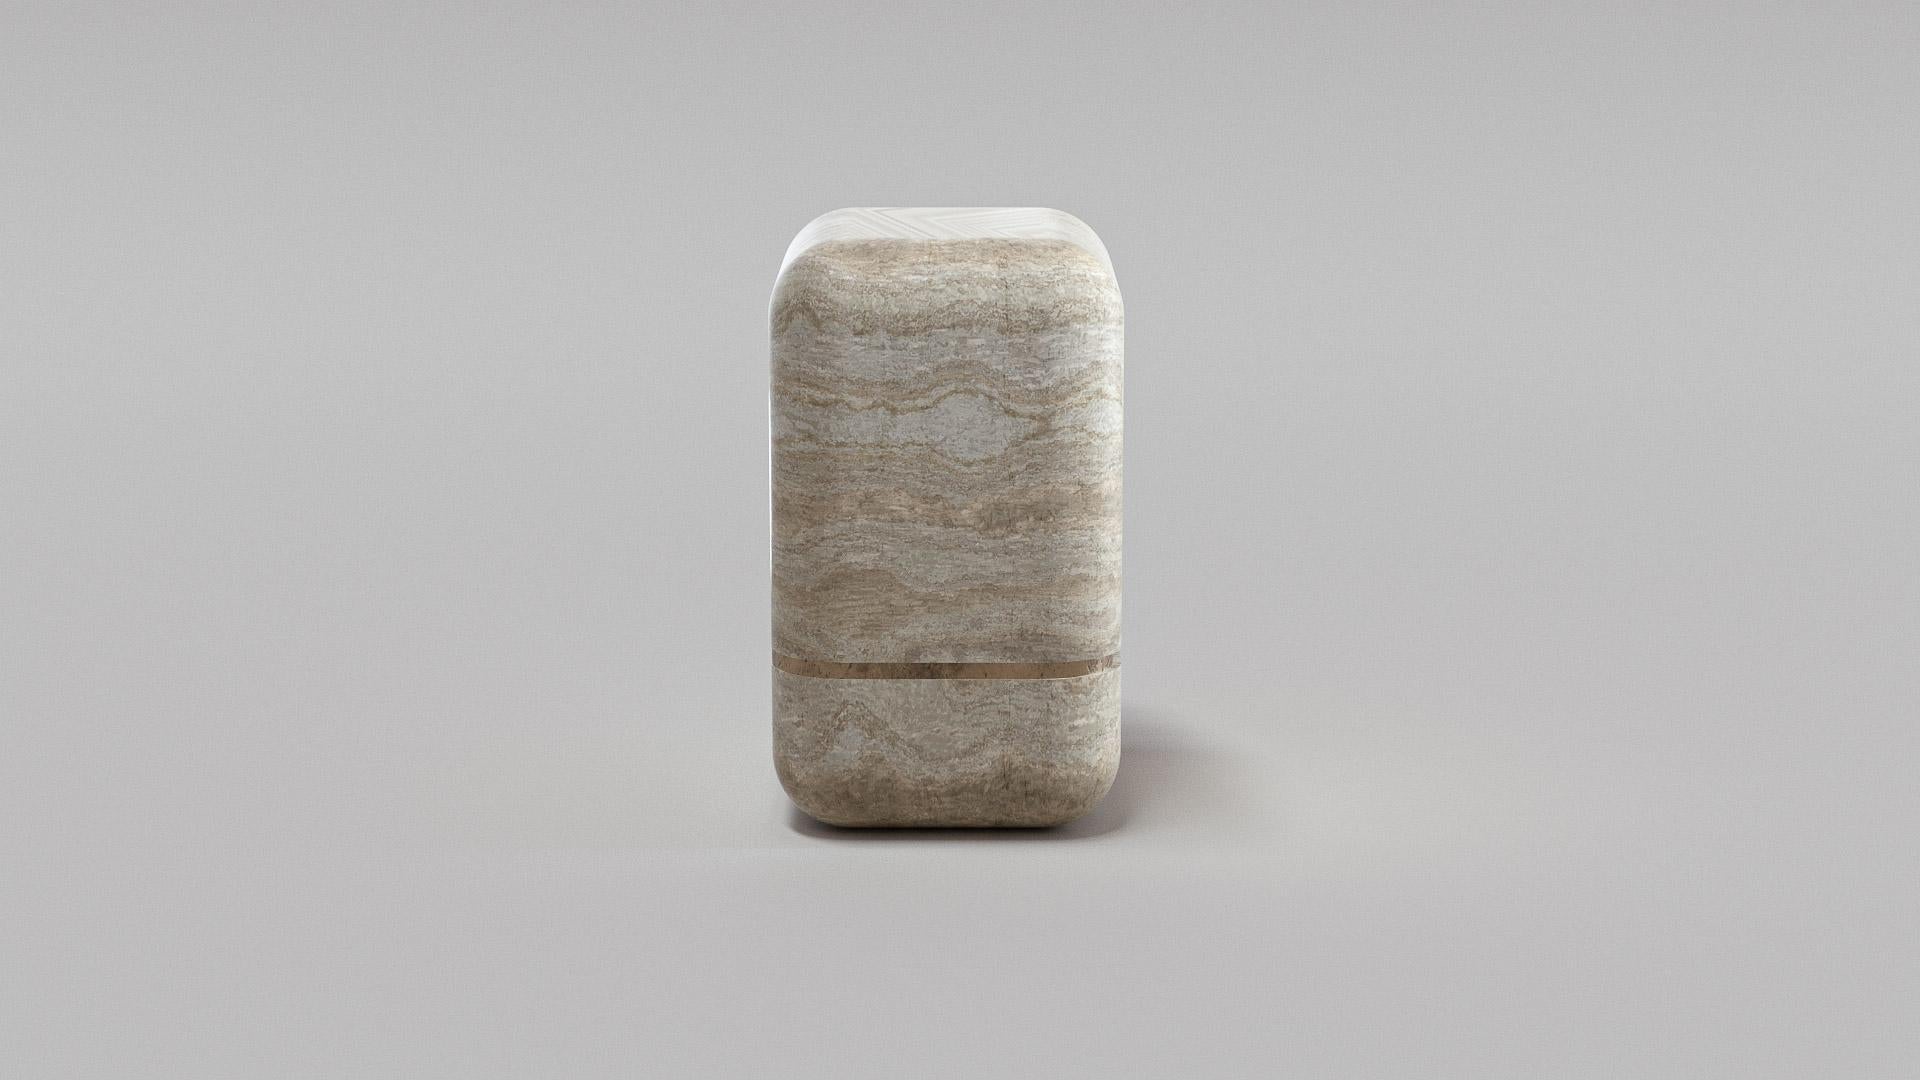 Marshmallow Travertine side table by Arthur Vallin
Numbered Edition
Dimensions: W 31 x D 25.4 x H 43 cm
Materials: Travertine
Finishing: Un-honed

French Artist, Designer, and Creative Director Arthur Vallin hold a master’s degree in Art